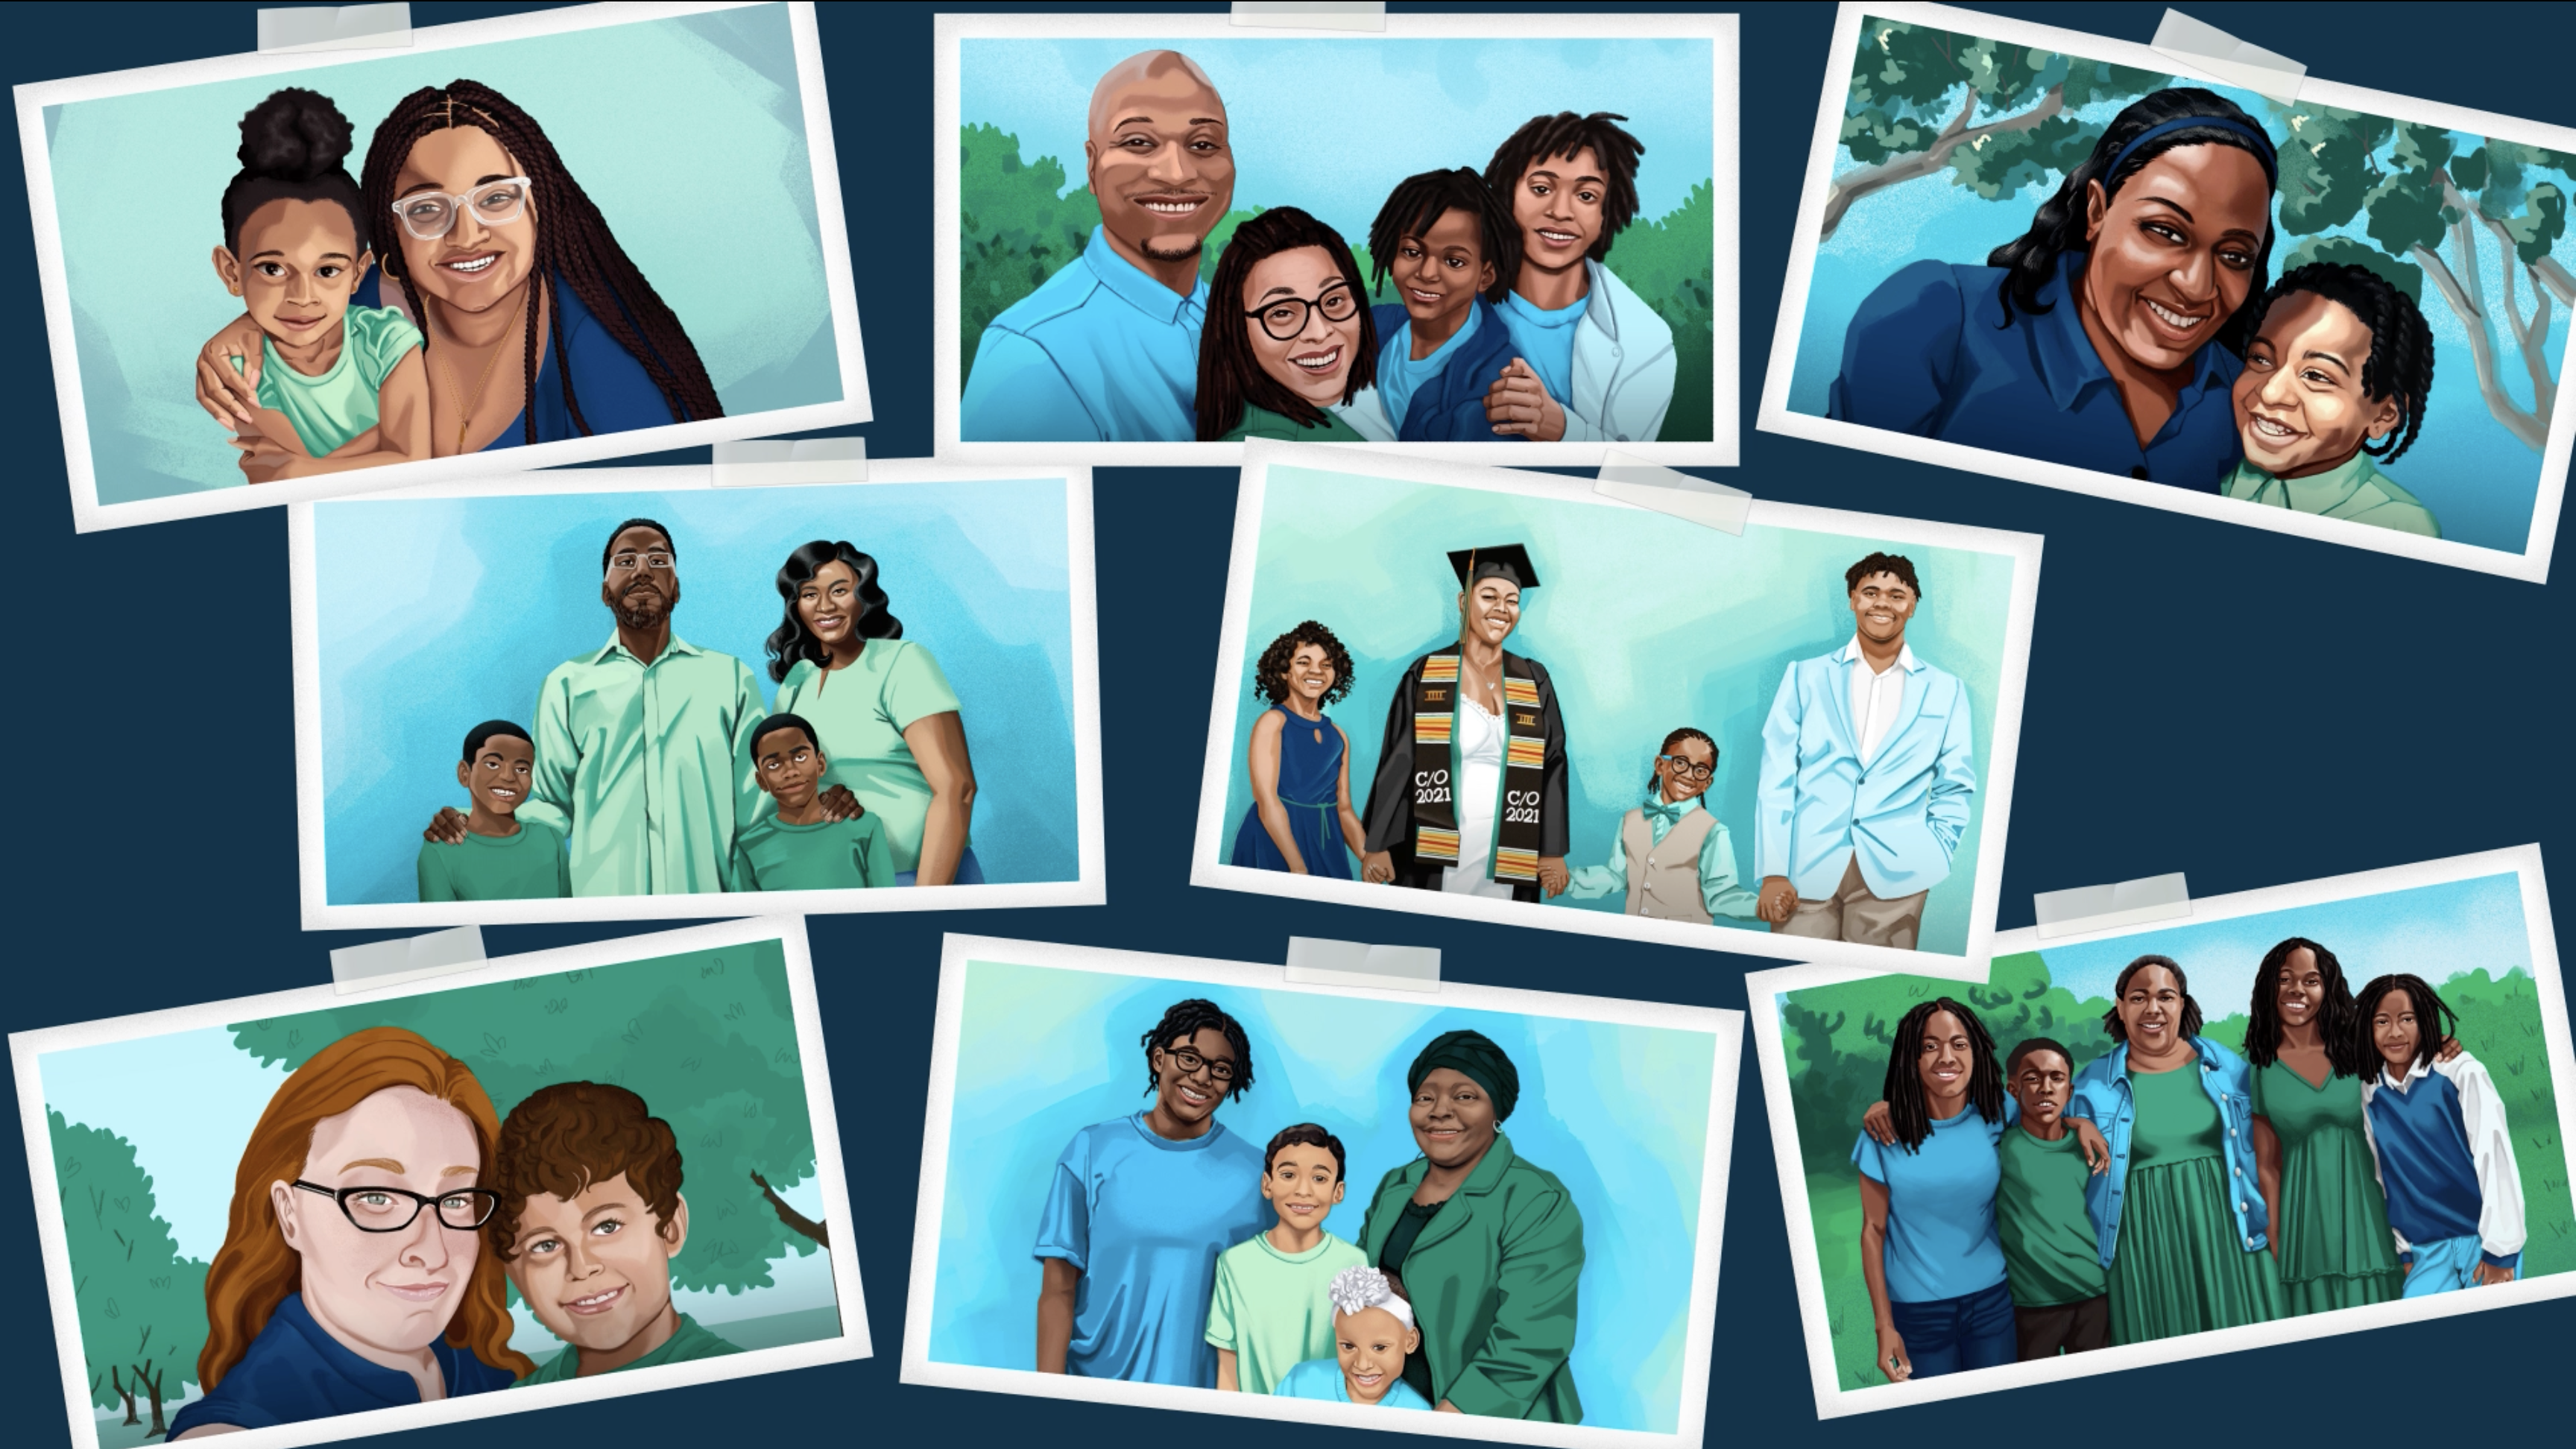 A collage of family photos of the Family Advisory Committee members and their families